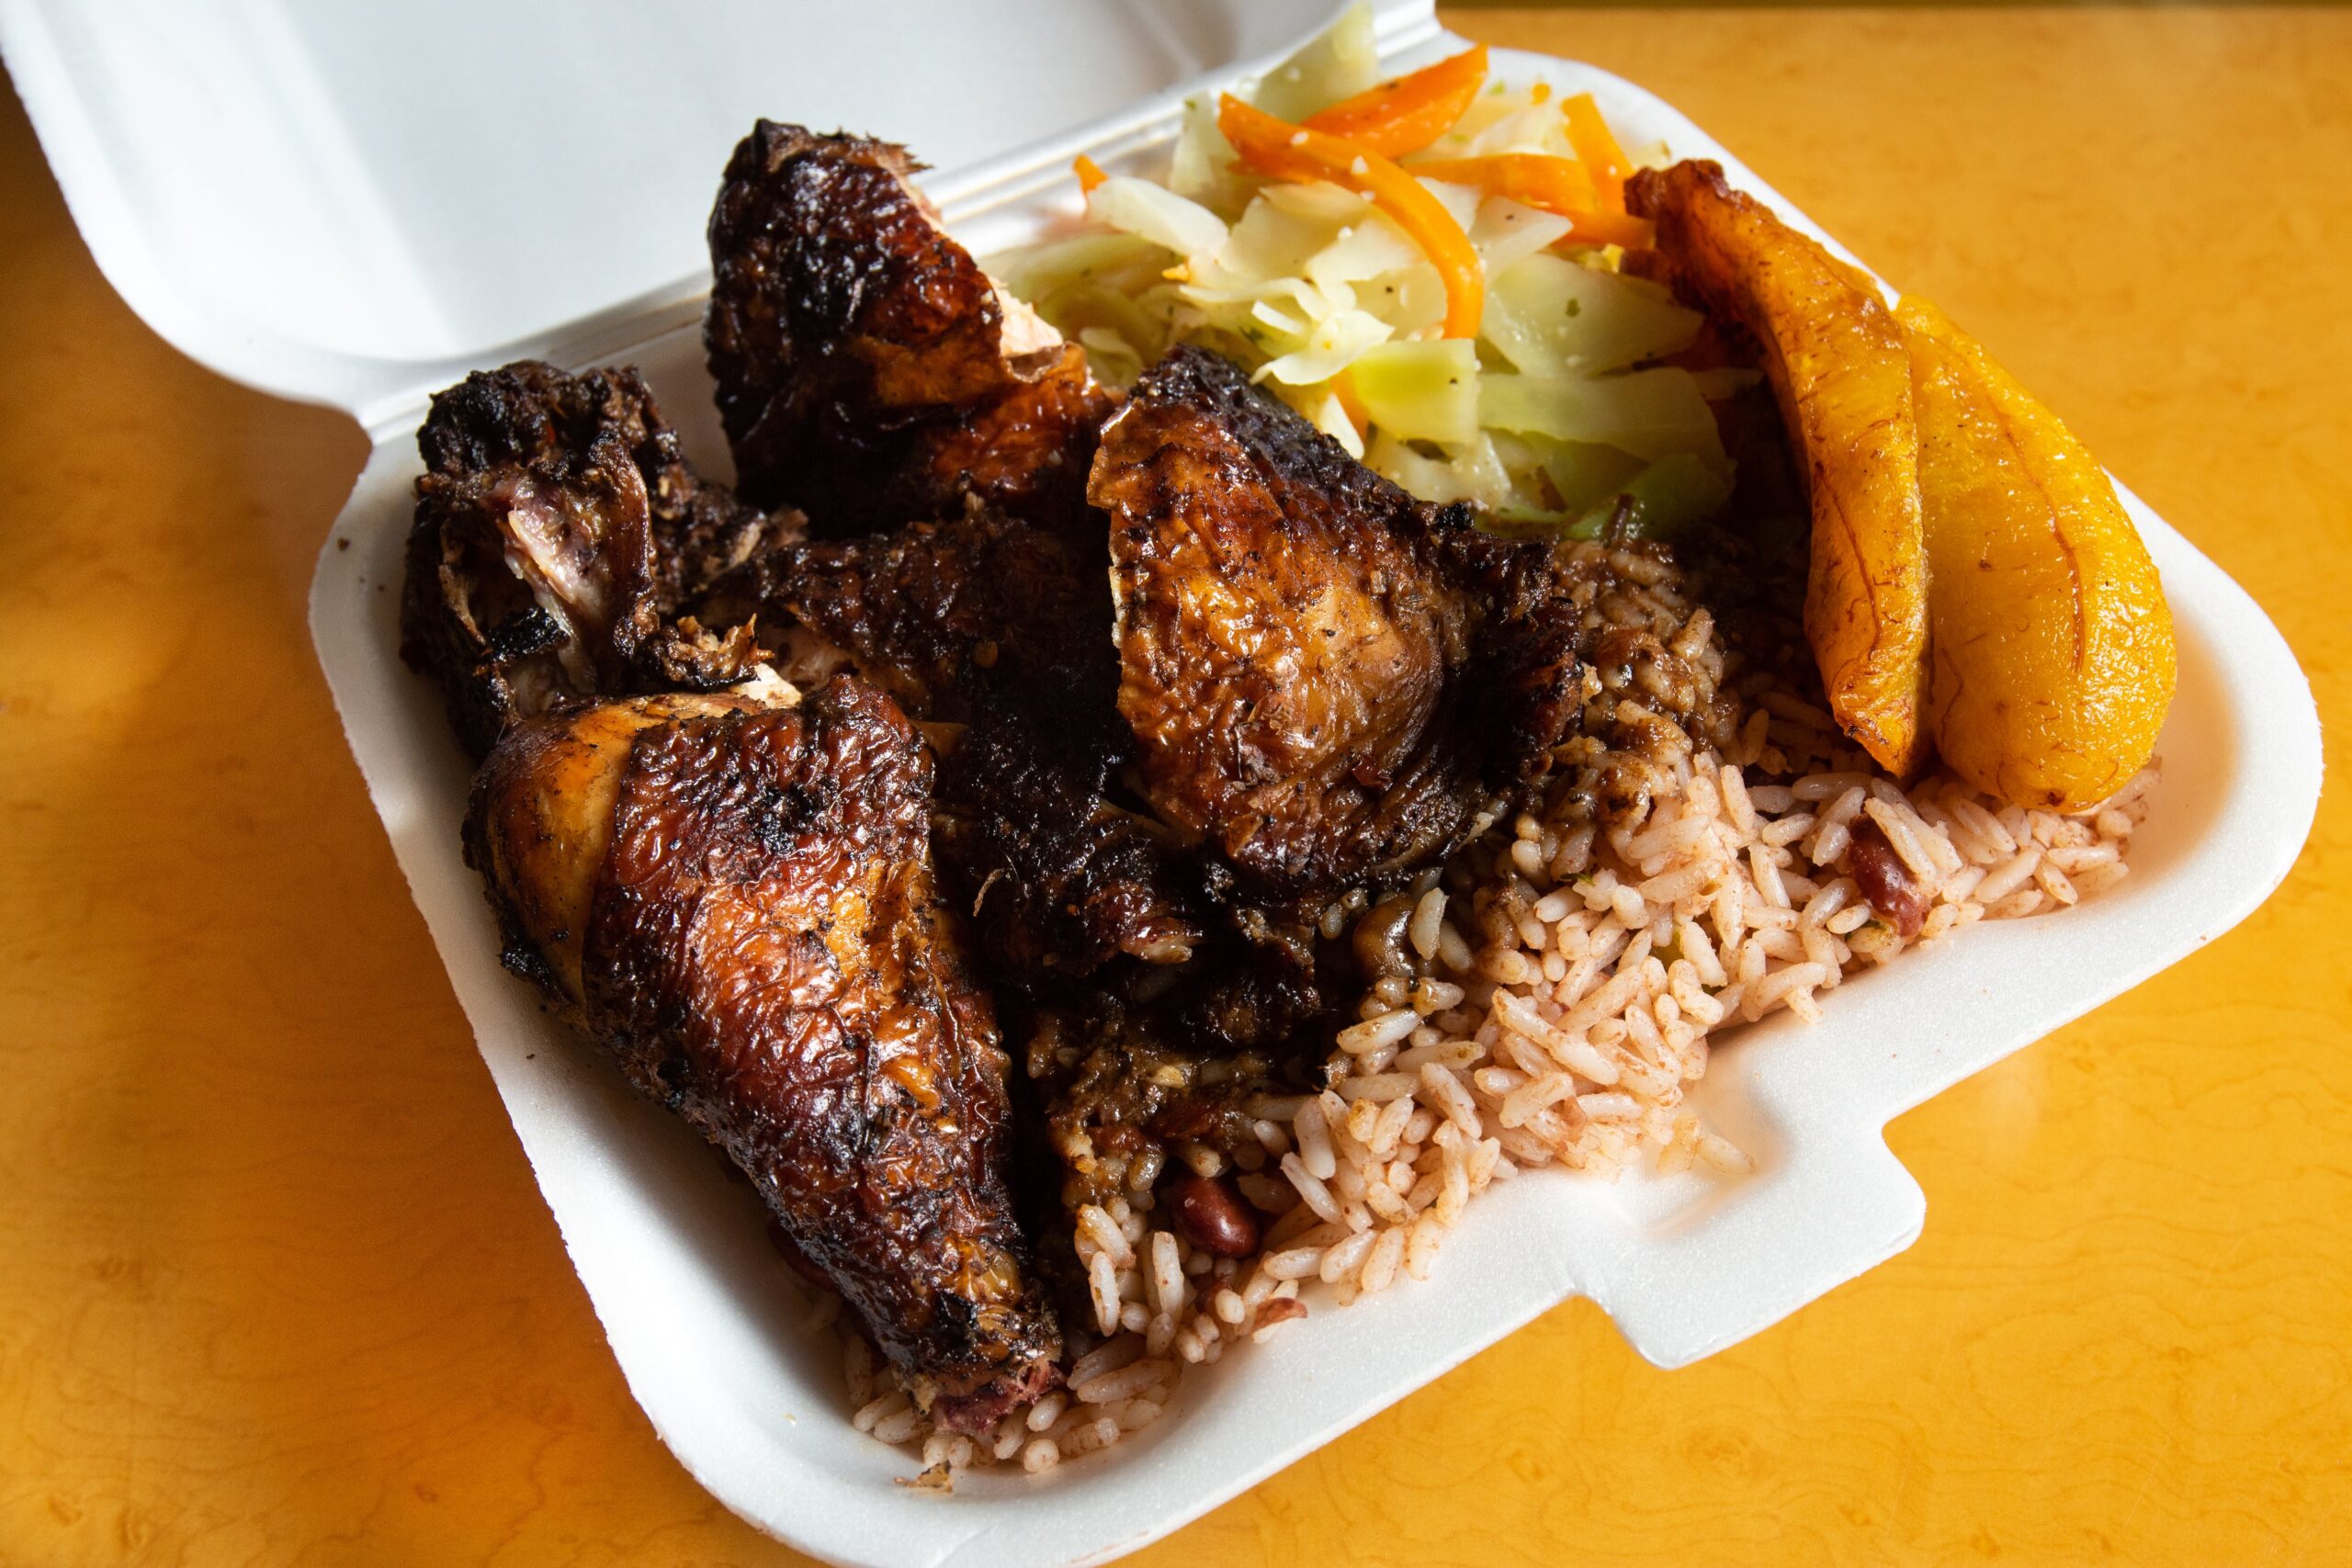 Miami’s Island Flavorz is famous for its jerk chicken, which is full of flavour. The chefs here add a little Miami twist to the recipe, and everyone loves it. It’s the perfect mix of spicy and sweet.